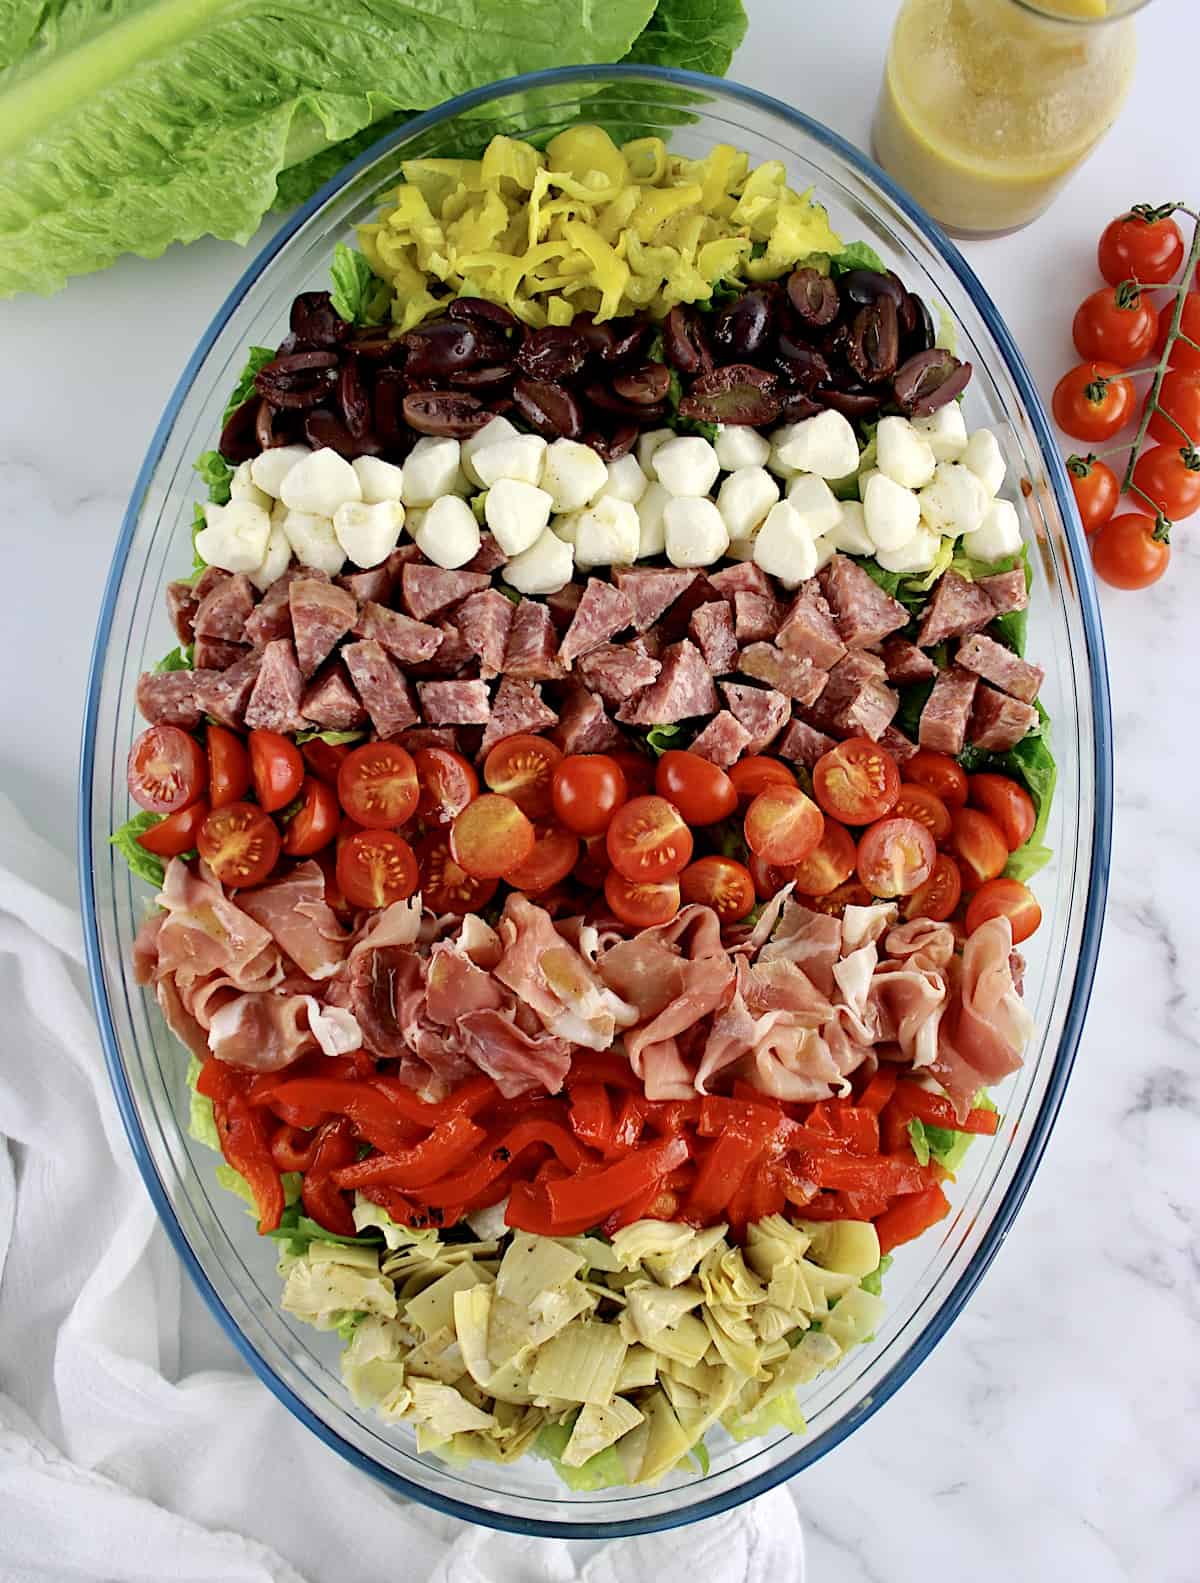 Antipasto Salad with ingredients arranged in horizontal rows